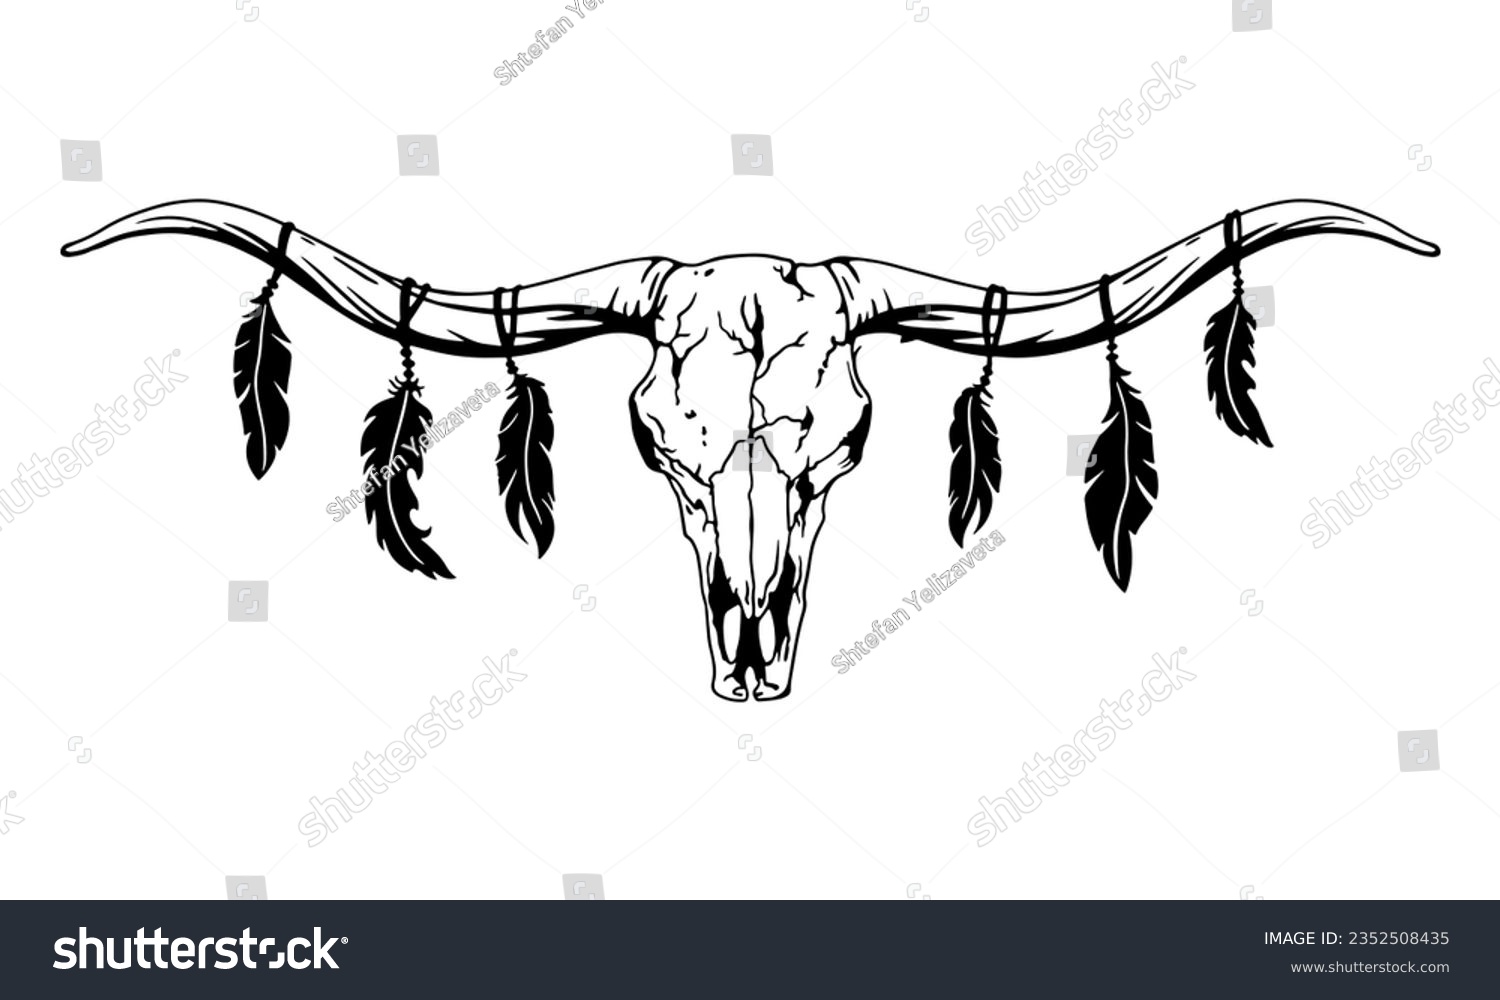 SVG of Texas longhorn black and white vector illustration. Longhorn skull with feathers, clipart. Silhouette Texas Longhorn. Bull Head Logo Icon. svg